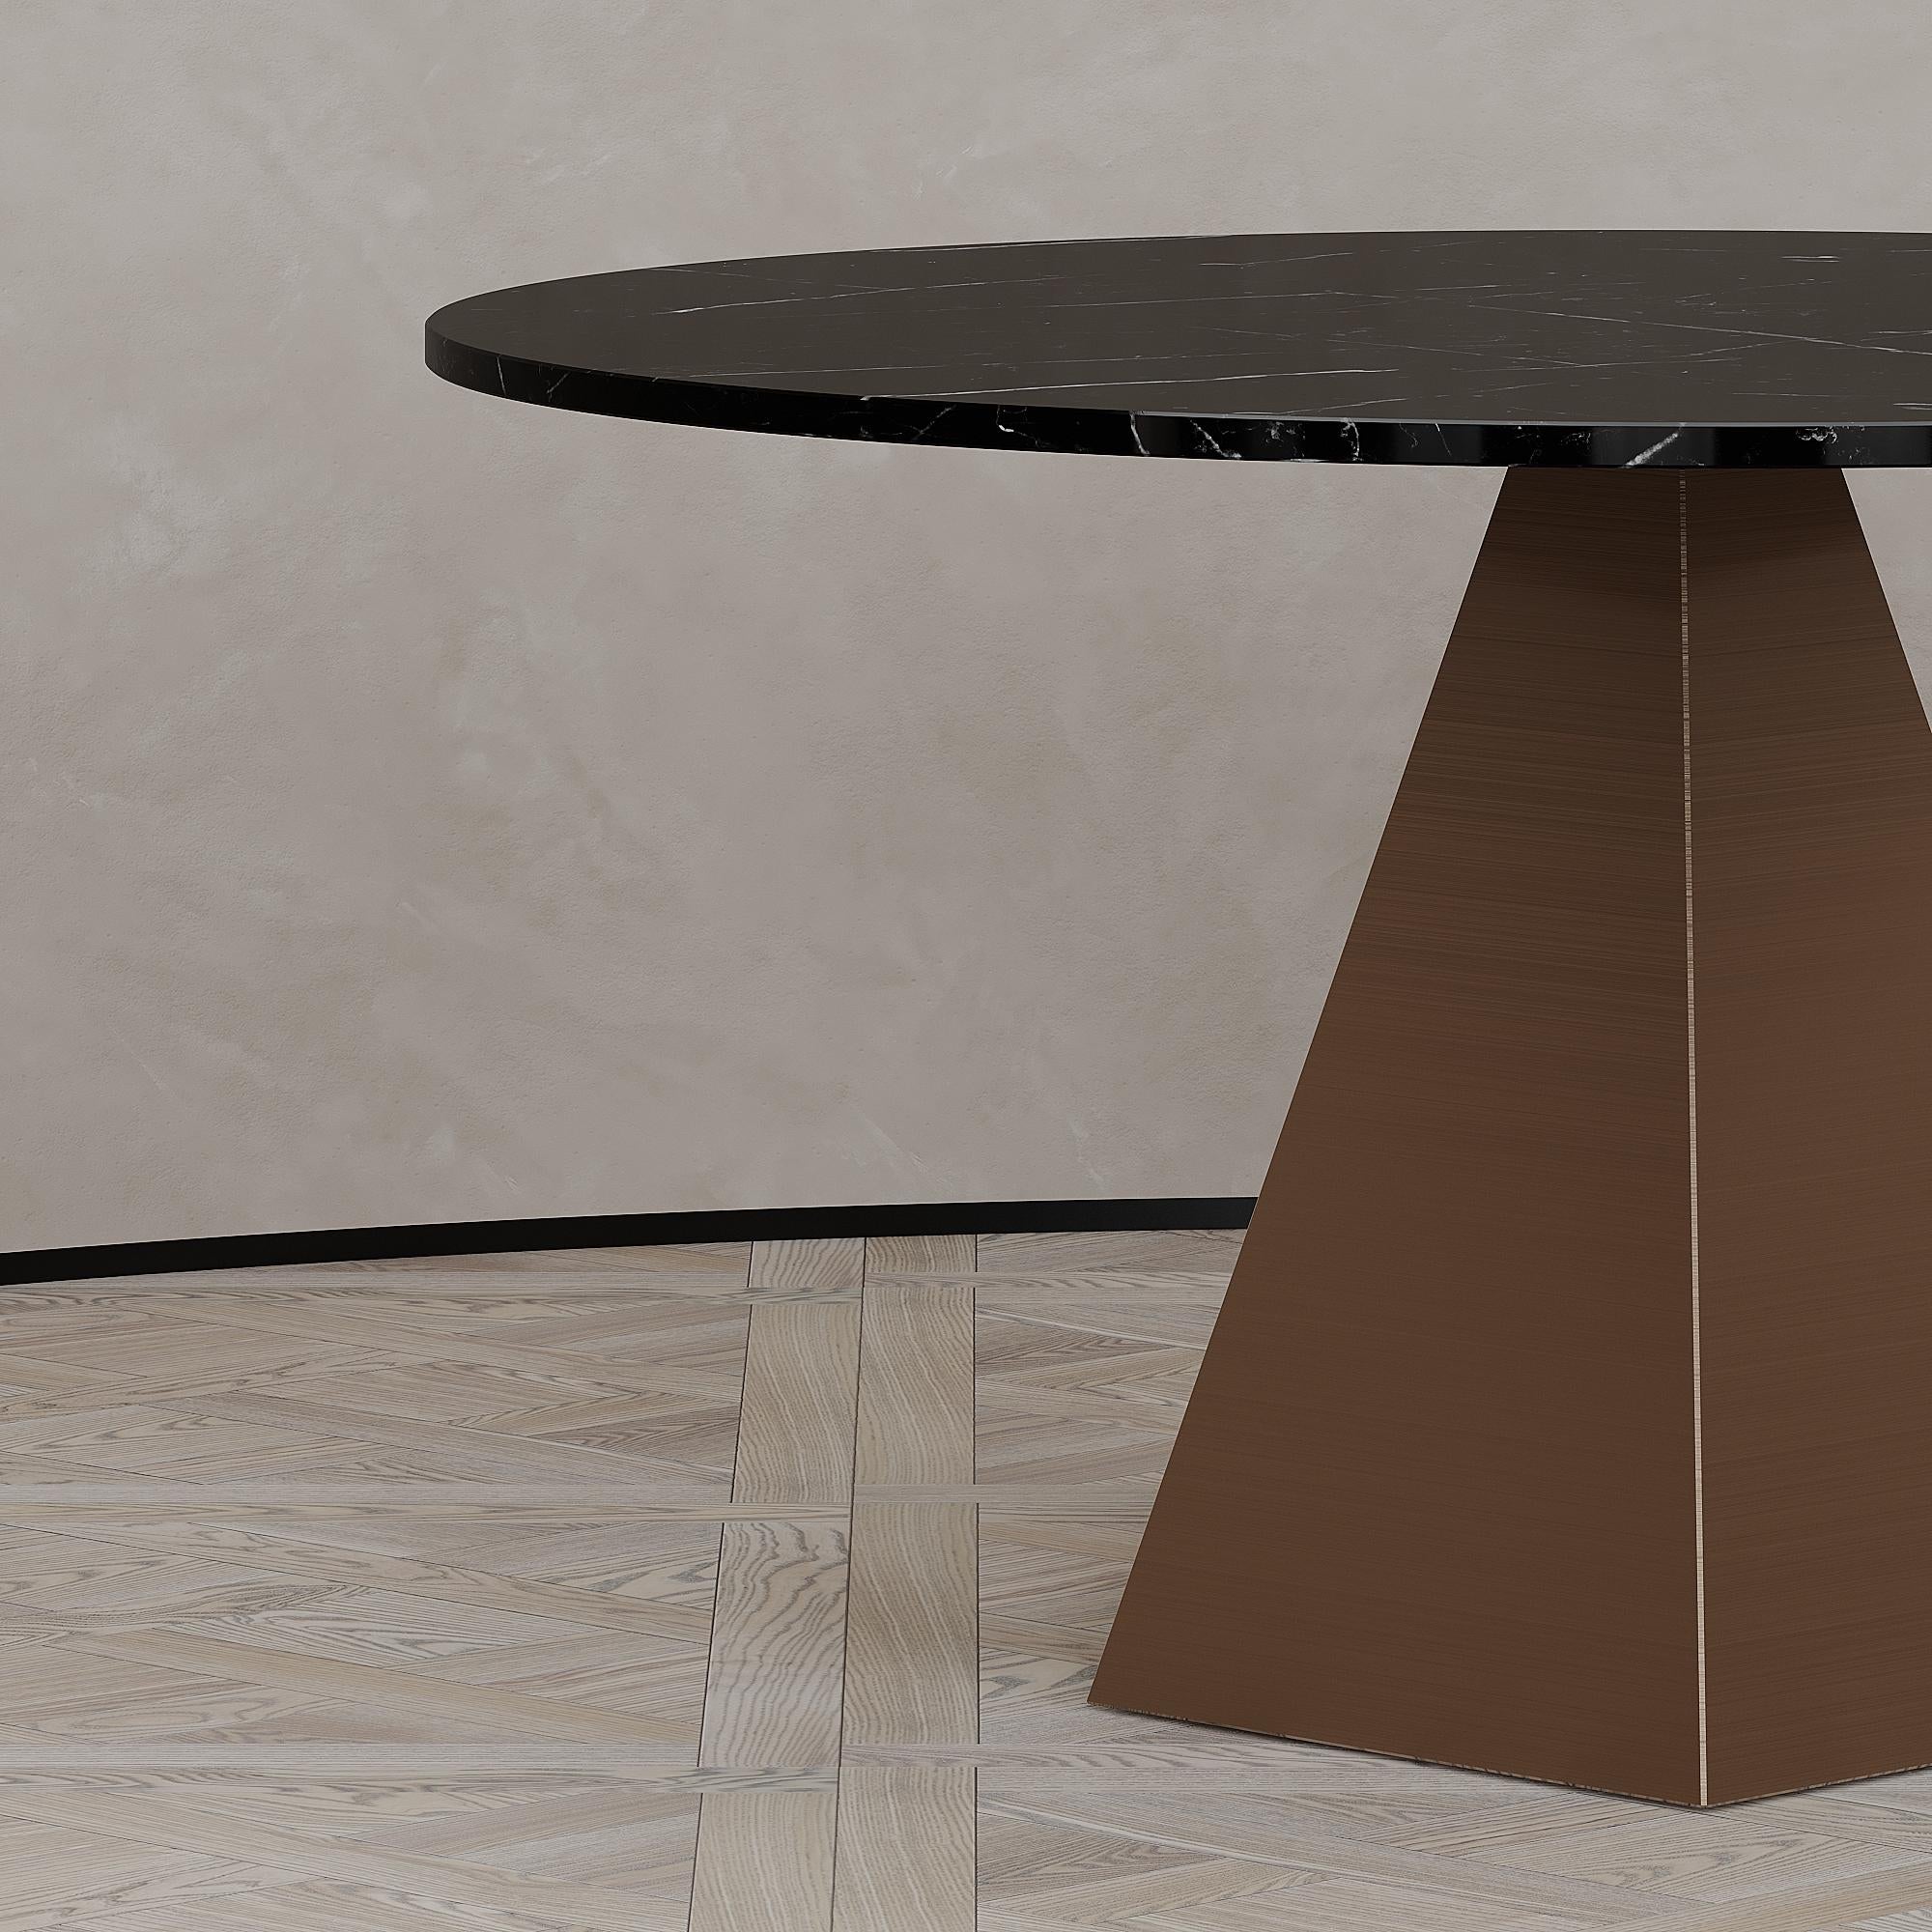 The Solaris dining table is designed by Emél & Browne in the Minimalist and contemporary style and custom made in Italy by skilled artisans.

The Solaris dining table with its glowing copper base emits a healing sunset energy into interior spaces.